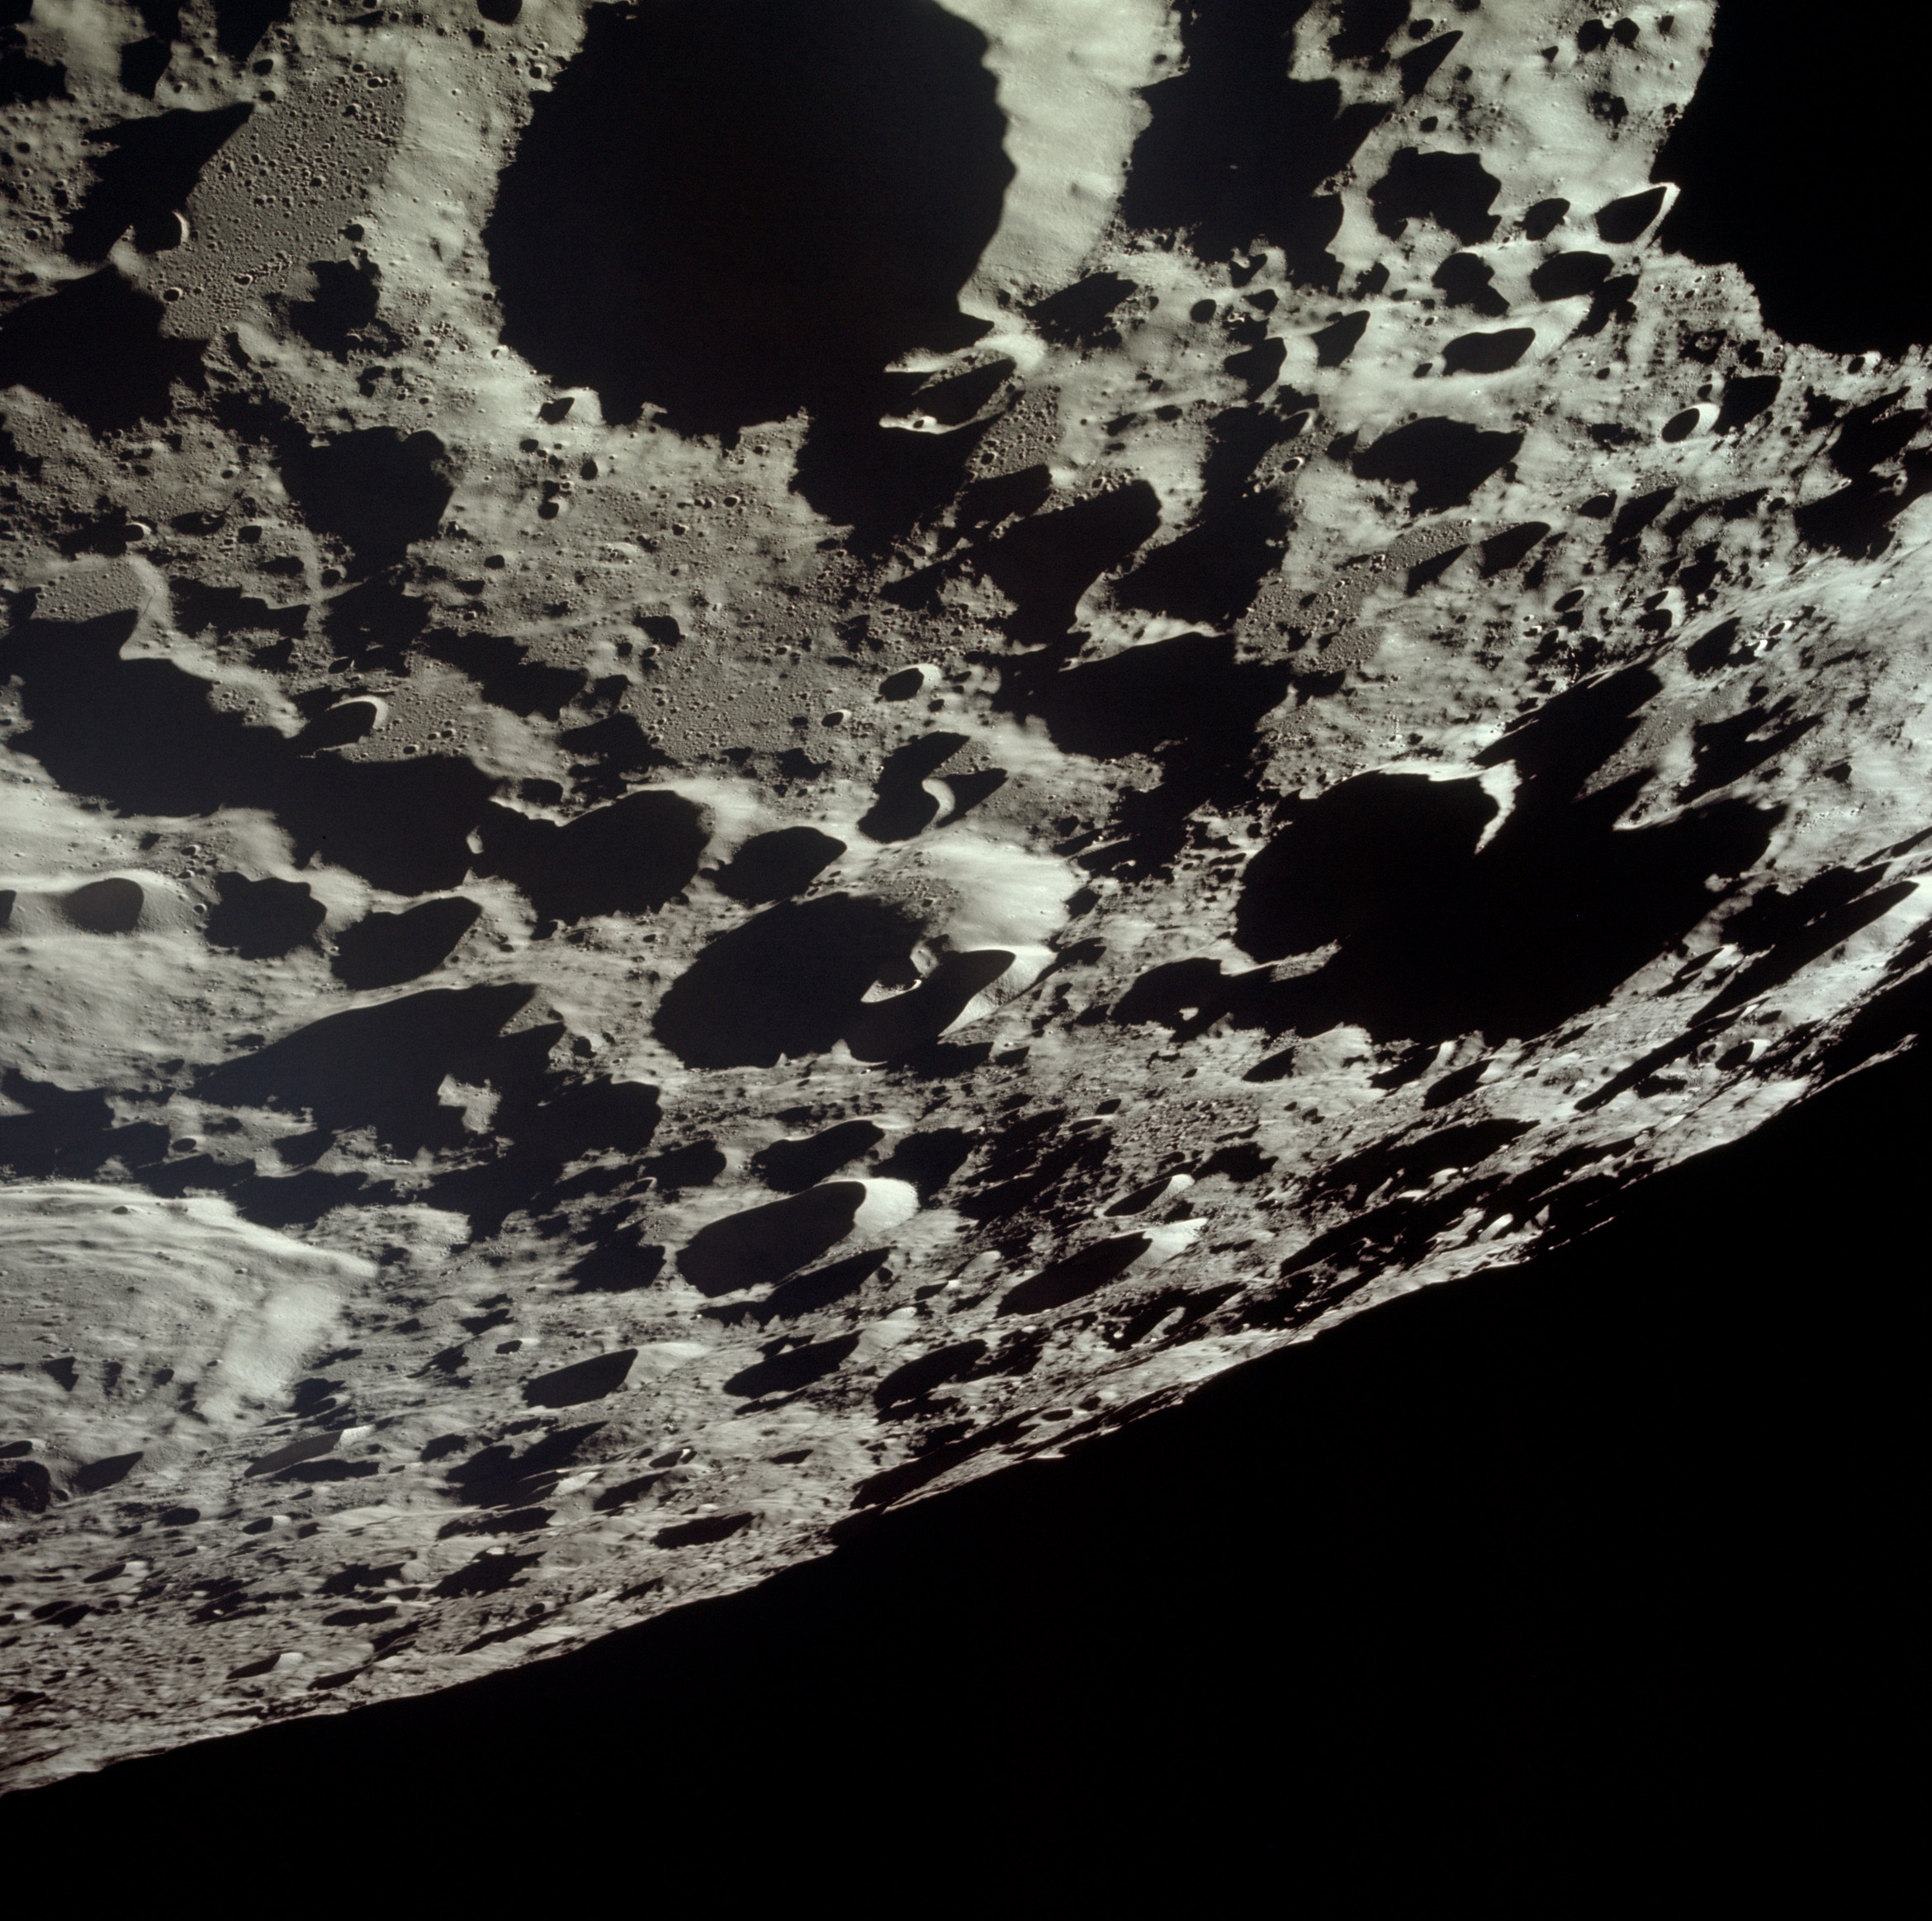 A view to the Moon surface pictured during the Apollo 11 orbiting the celestial body circa July 20, 1969.